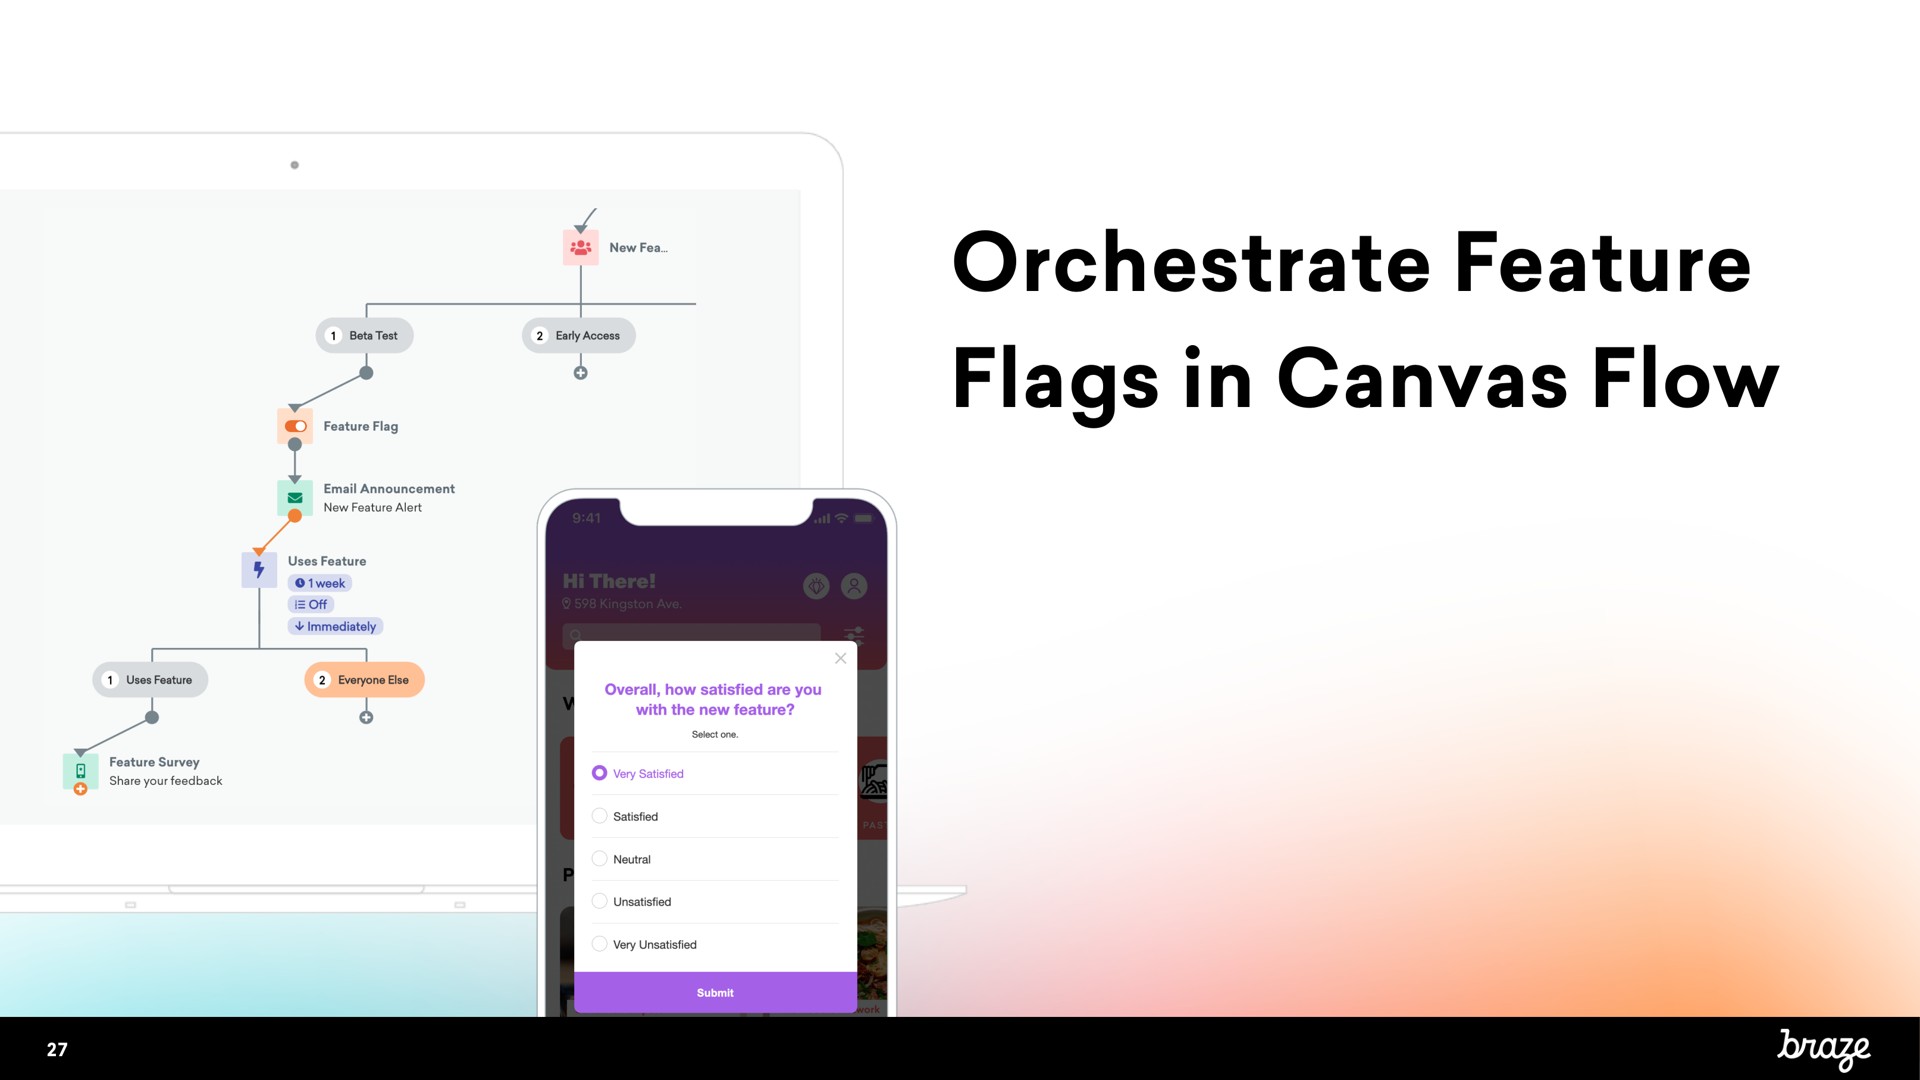 orchestrate feature flags in canvas flow | Braze